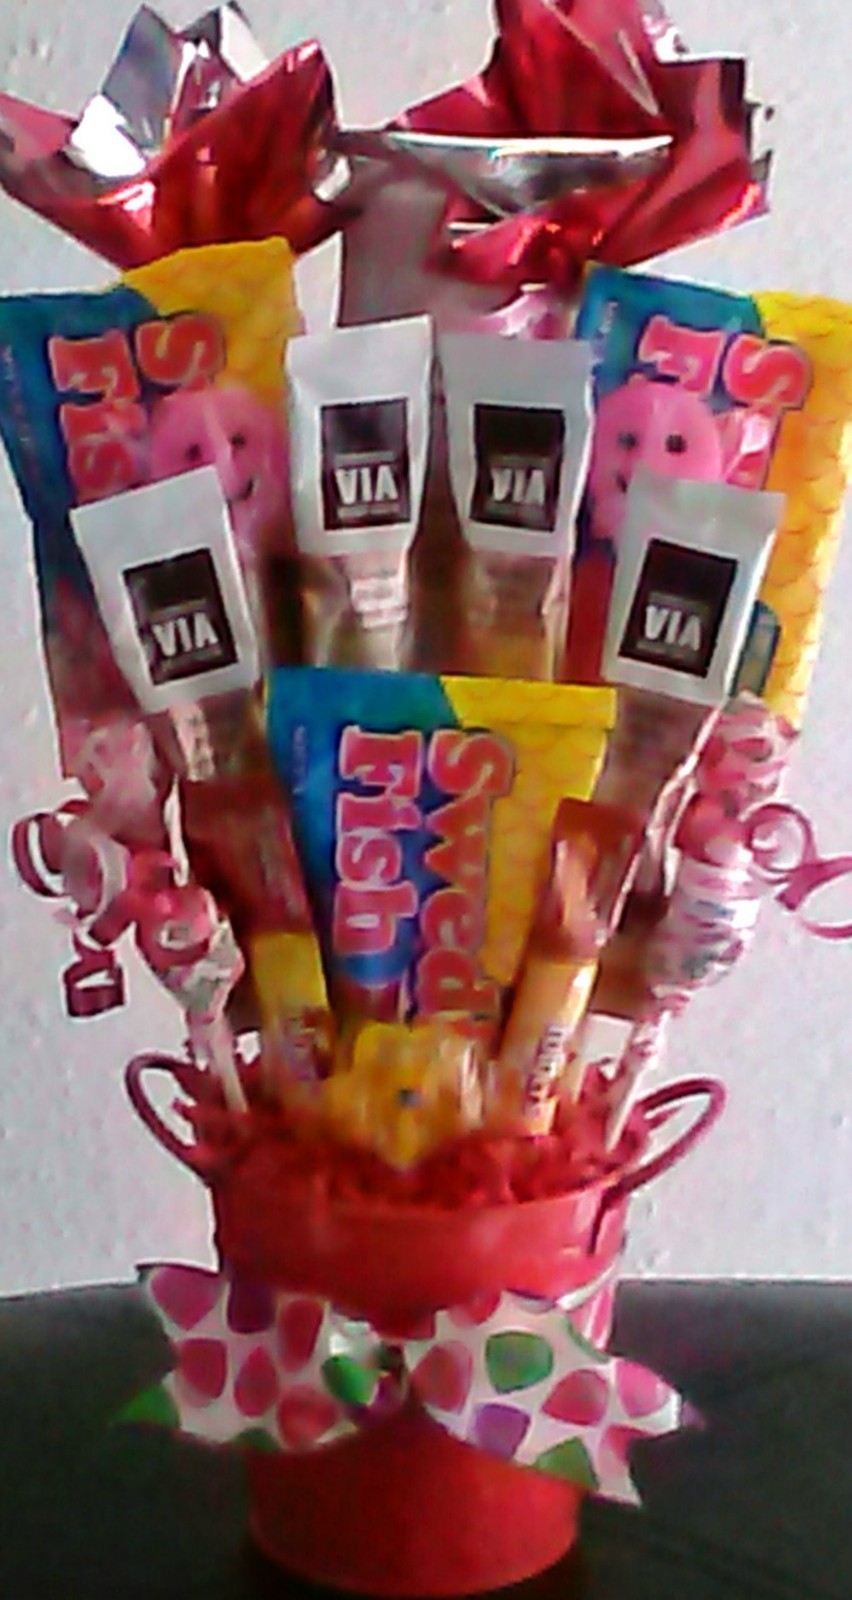 Coffee and Candy Bouquet - $25.00